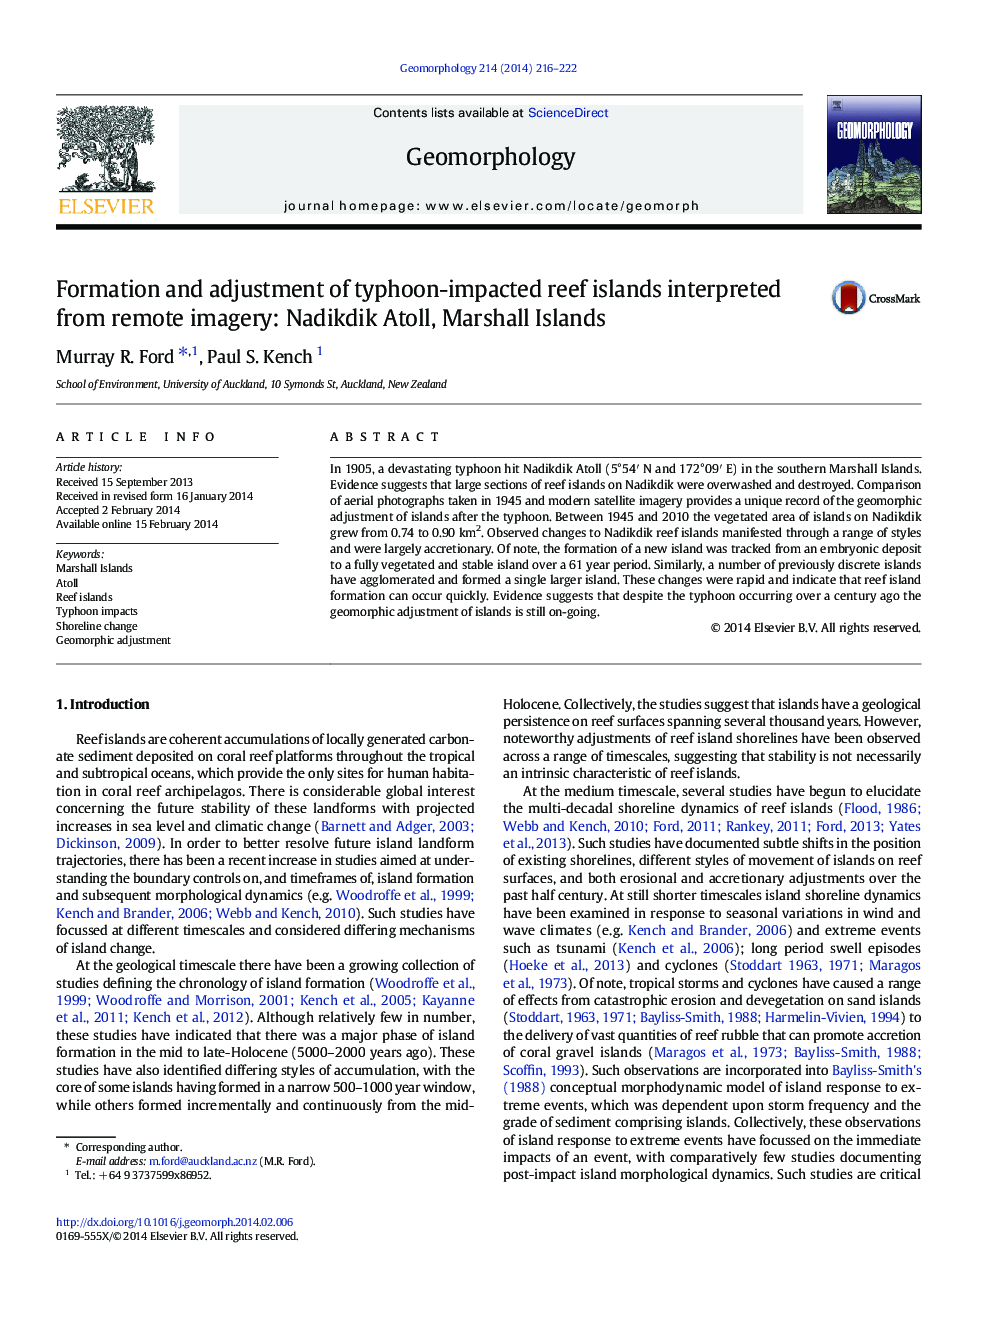 Formation and adjustment of typhoon-impacted reef islands interpreted from remote imagery: Nadikdik Atoll, Marshall Islands